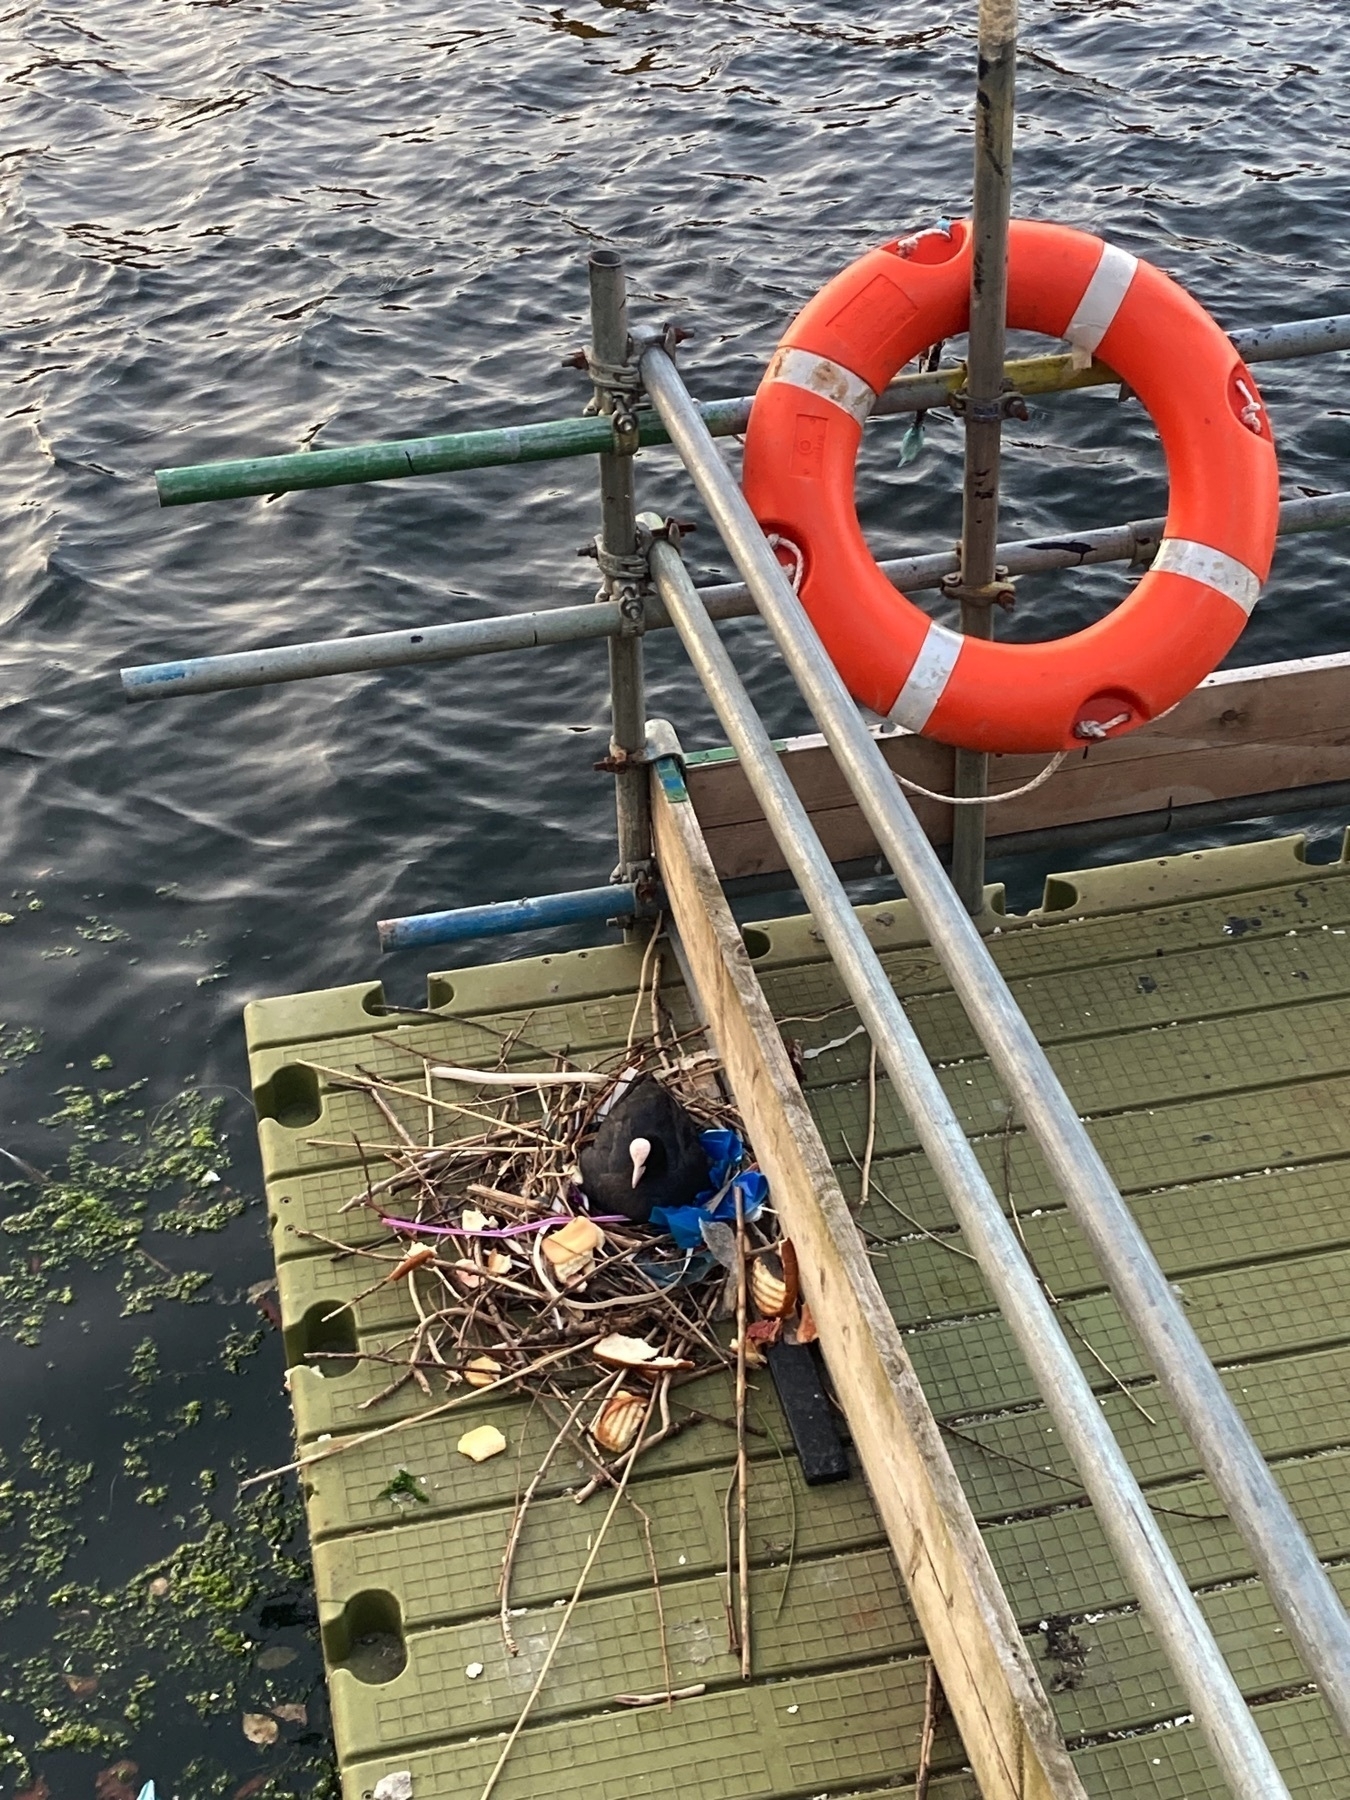 Coot nesting on a barge, with sandwiches.